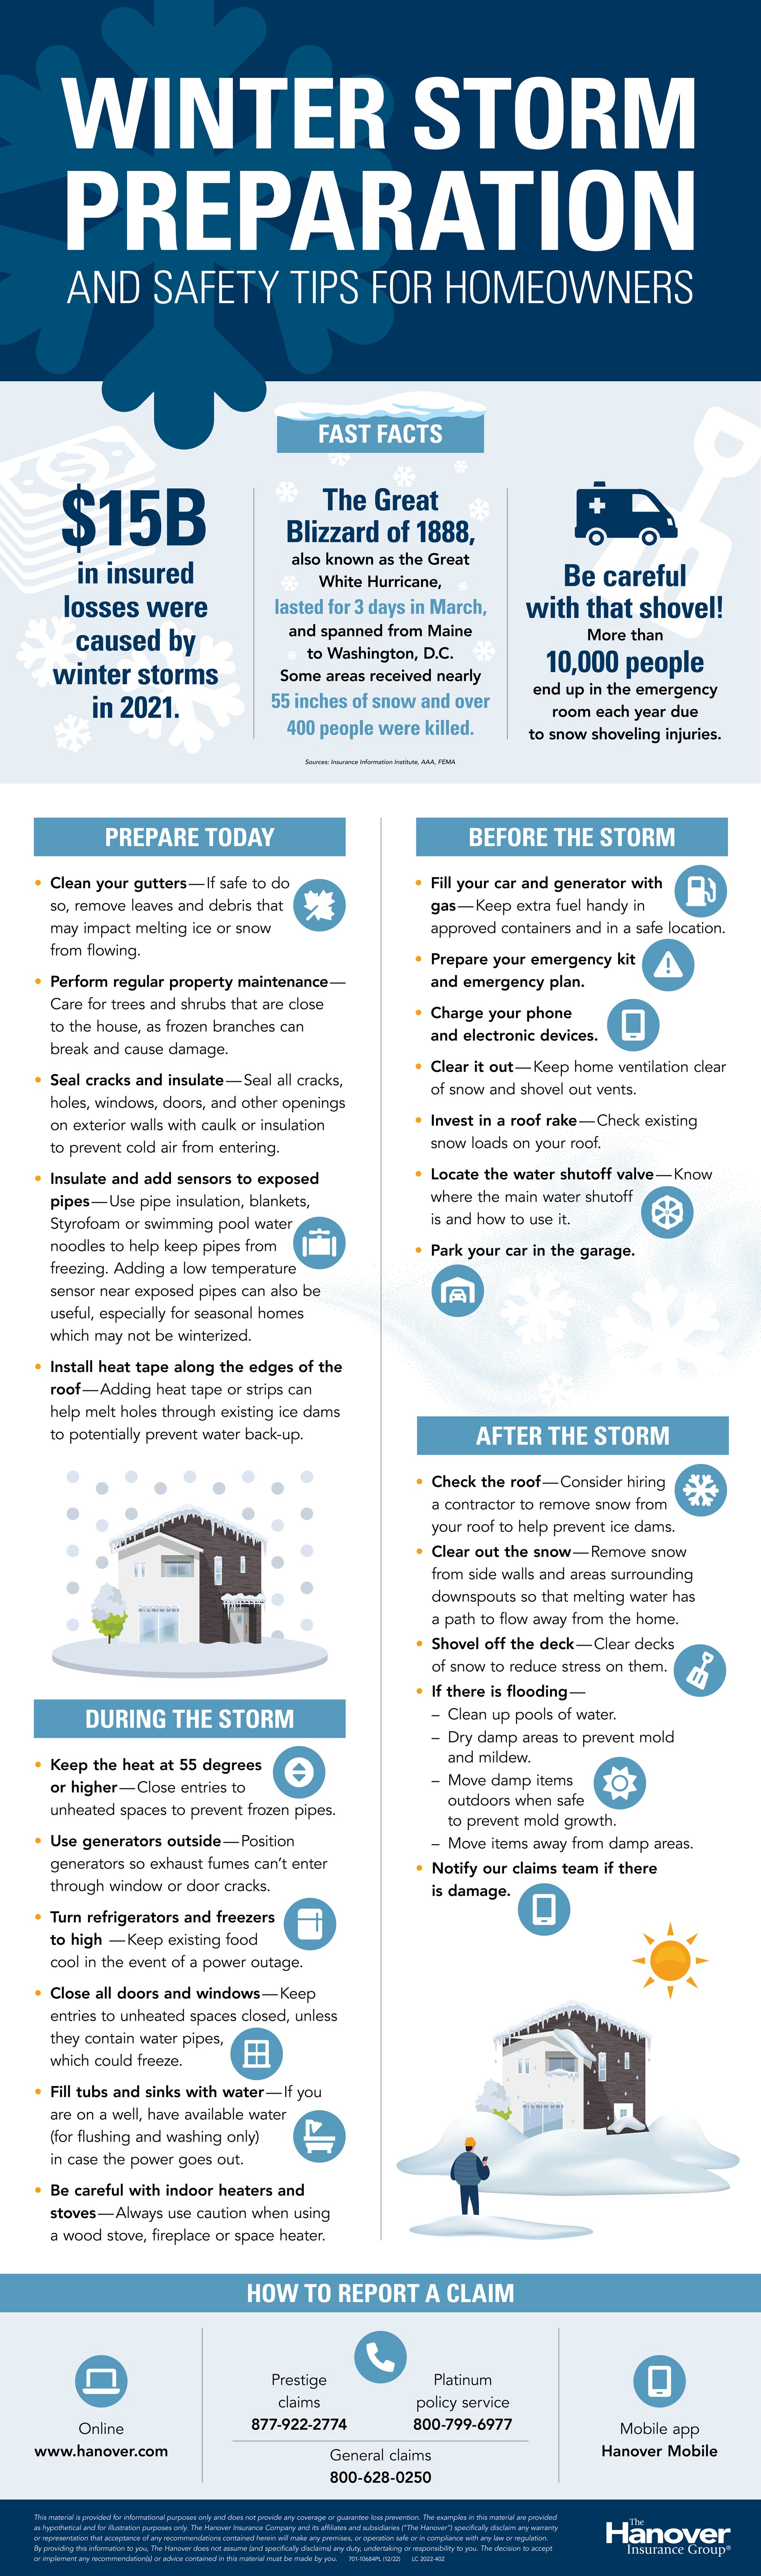 Infographic with homeowner tips for what to do before, during and after a winter storm.